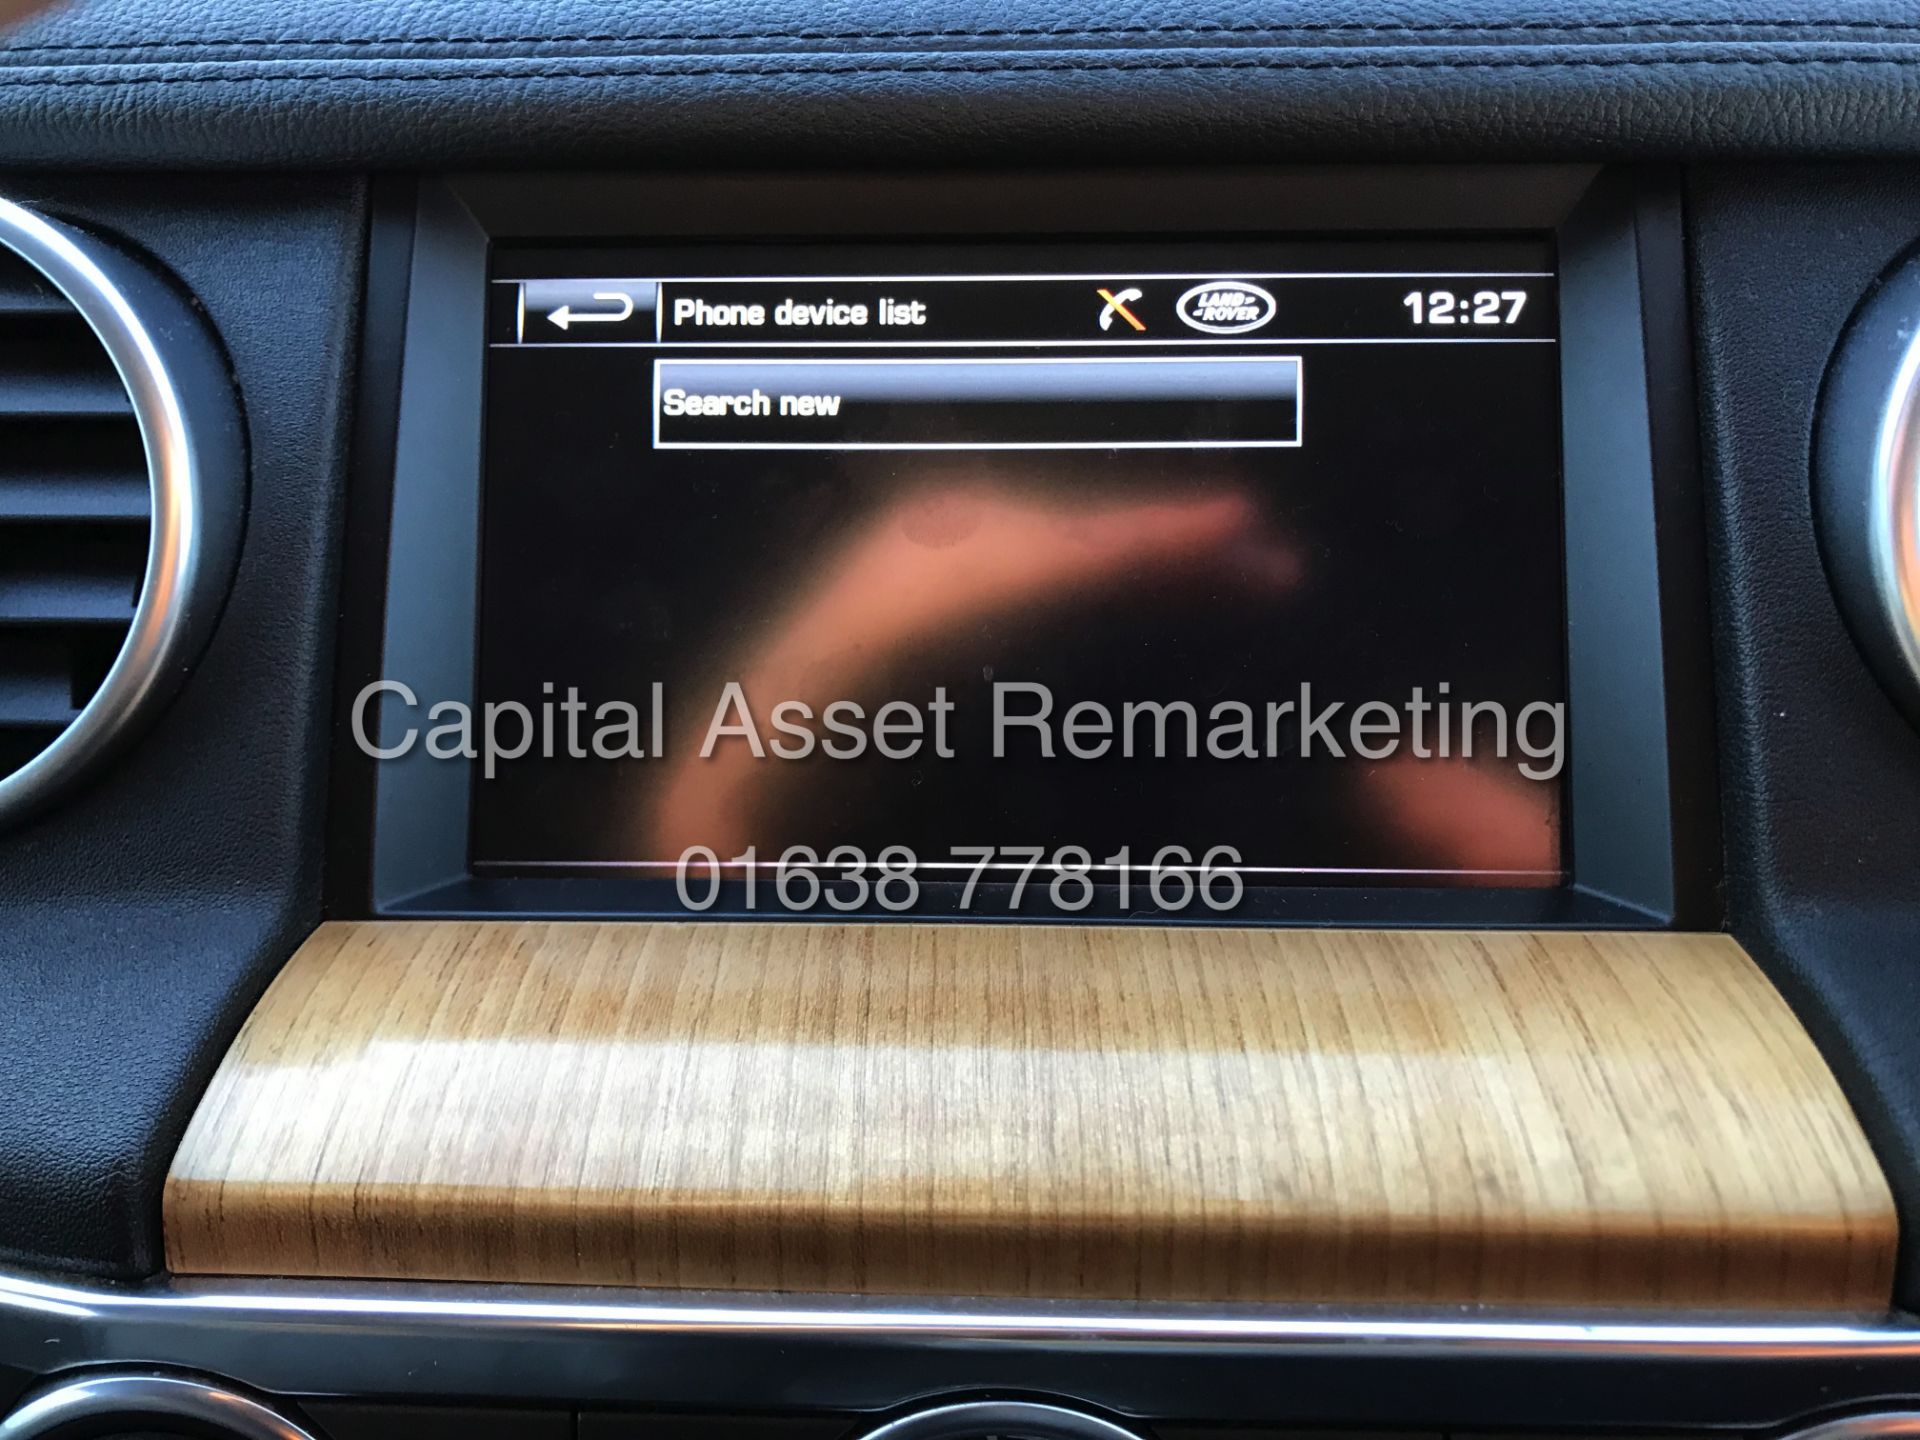 LAND ROVER DISCOVERY 4 "HSE" 3.0 SDV6 AUTOMATIC (13 REG) 7 SEATER **TOP OF THE RANGE** FULLY LOADED - Image 16 of 31